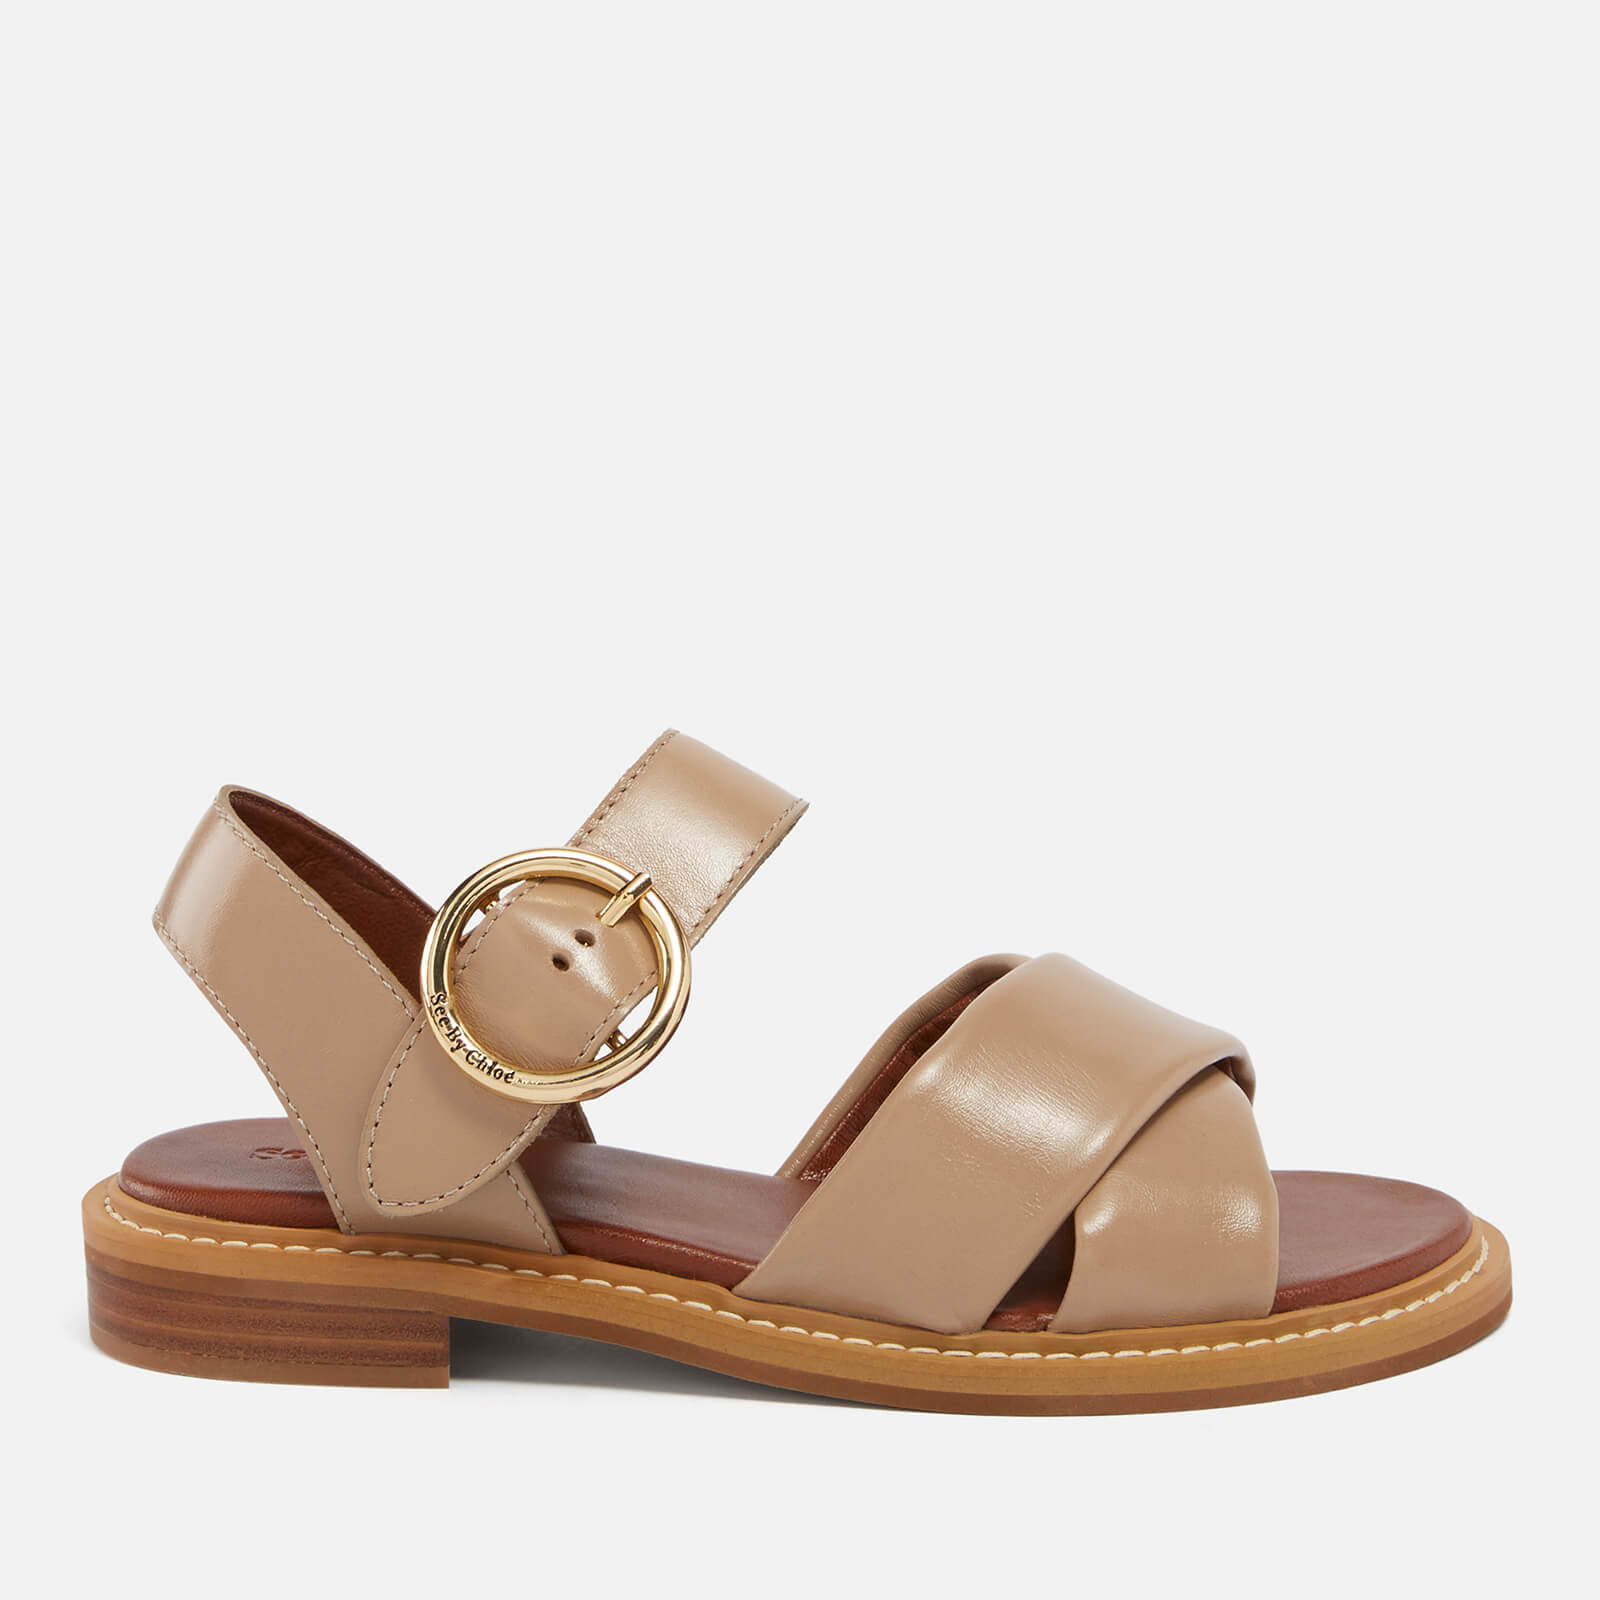 See by Chloé Women's Lyna Leather Sandals - UK 3